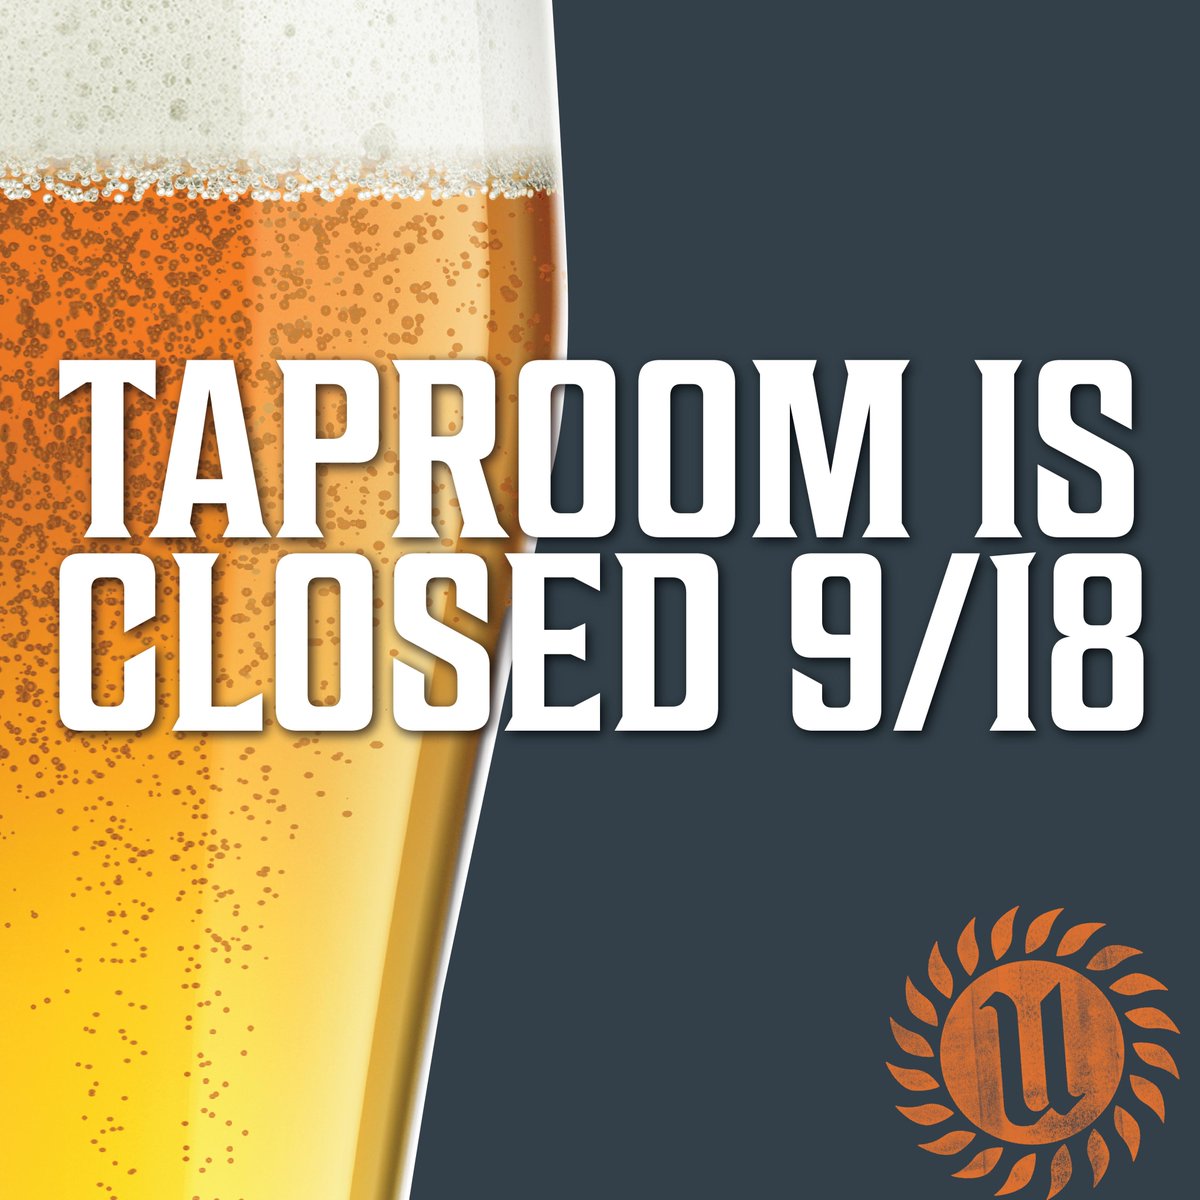 Our Taproom will be CLOSED today to give our awesome bar staff a nice little break! We're sorry for any inconvenience. We will be back to regular hours tomorrow 9/19 🍻